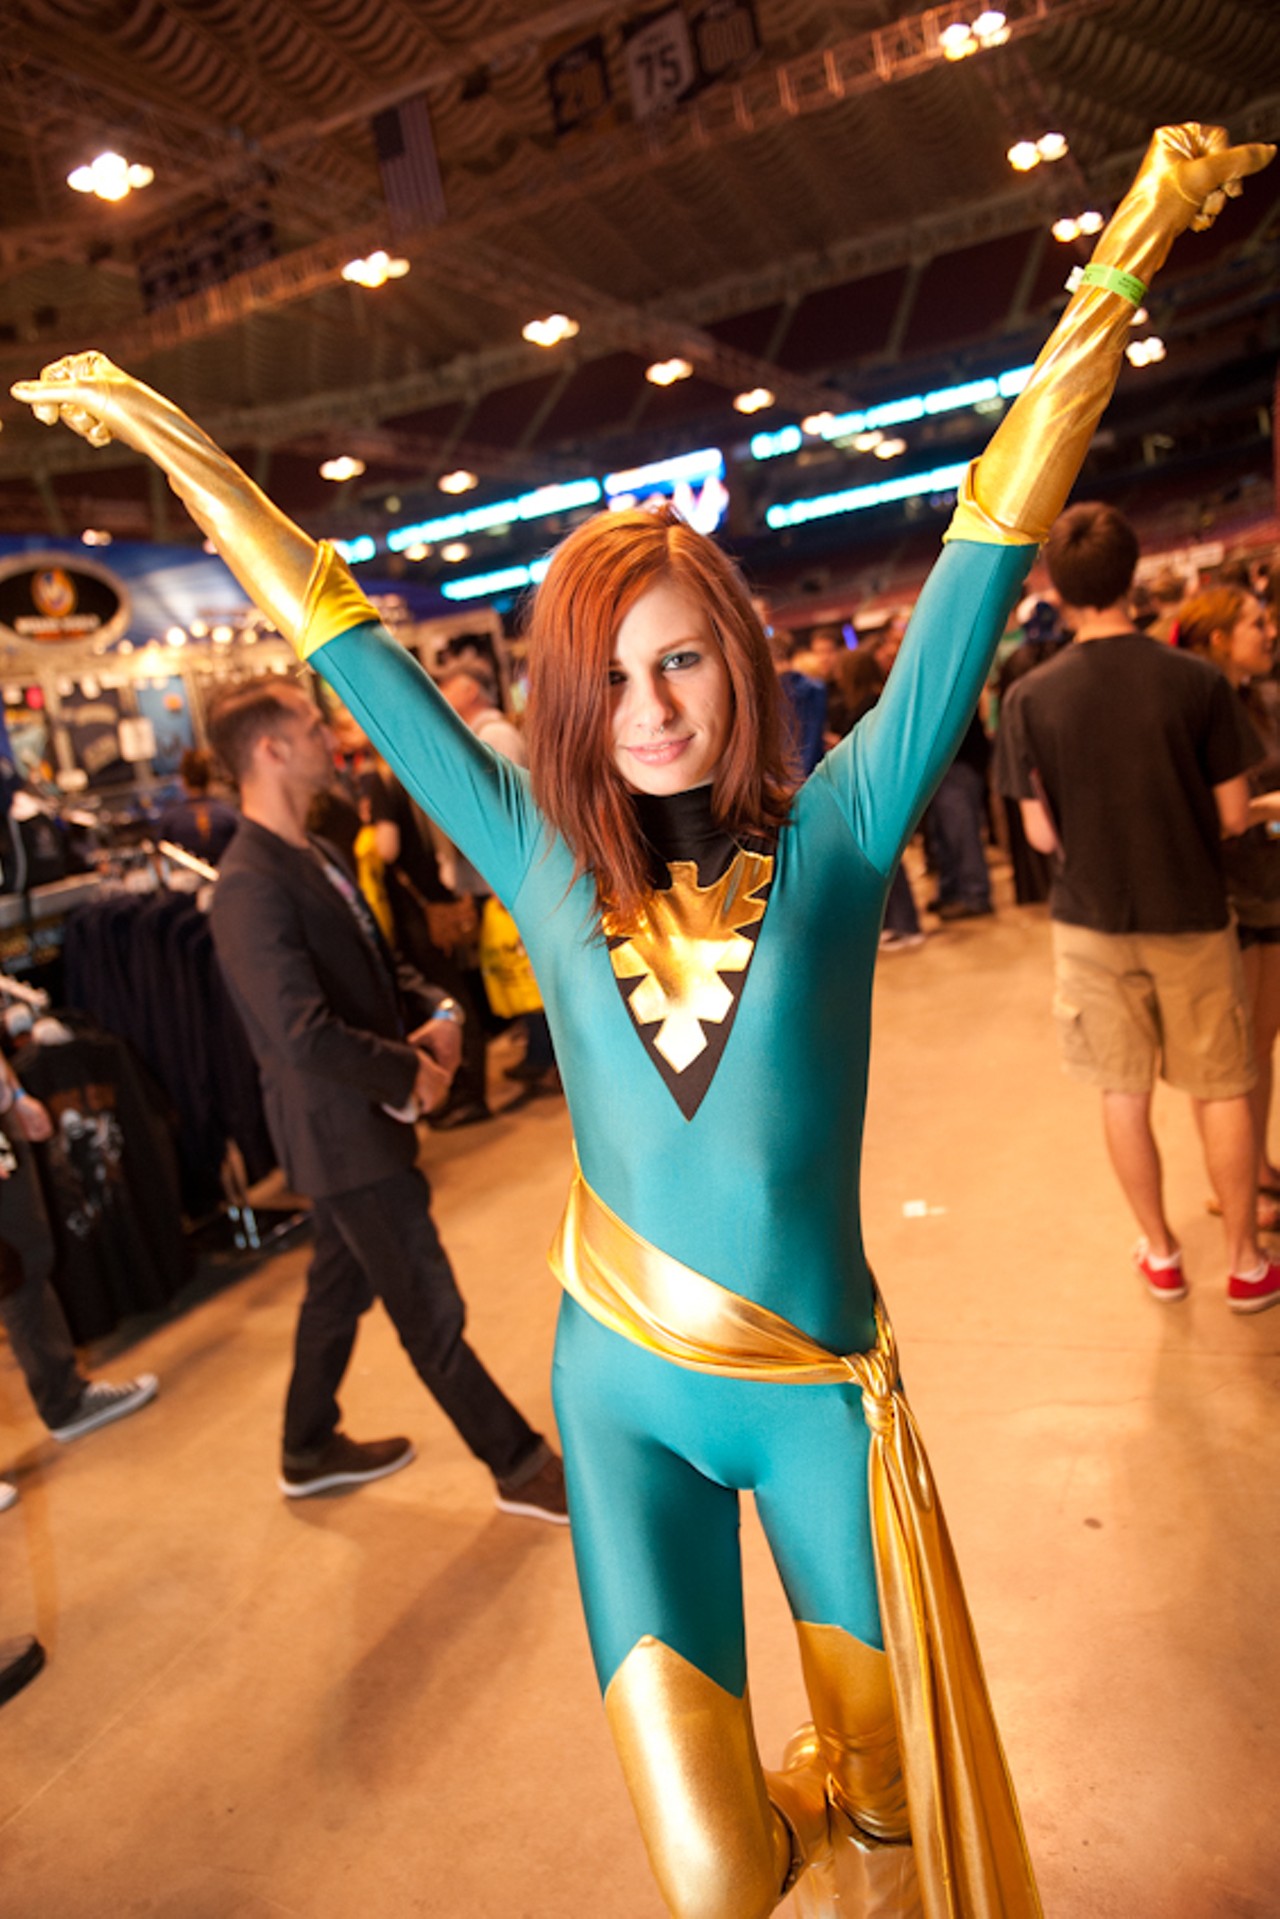 Jean Grey/Phoenix, part of the X-Men universe. X-Men: Days of Future Past is one of our ten must-see movies of 2014.